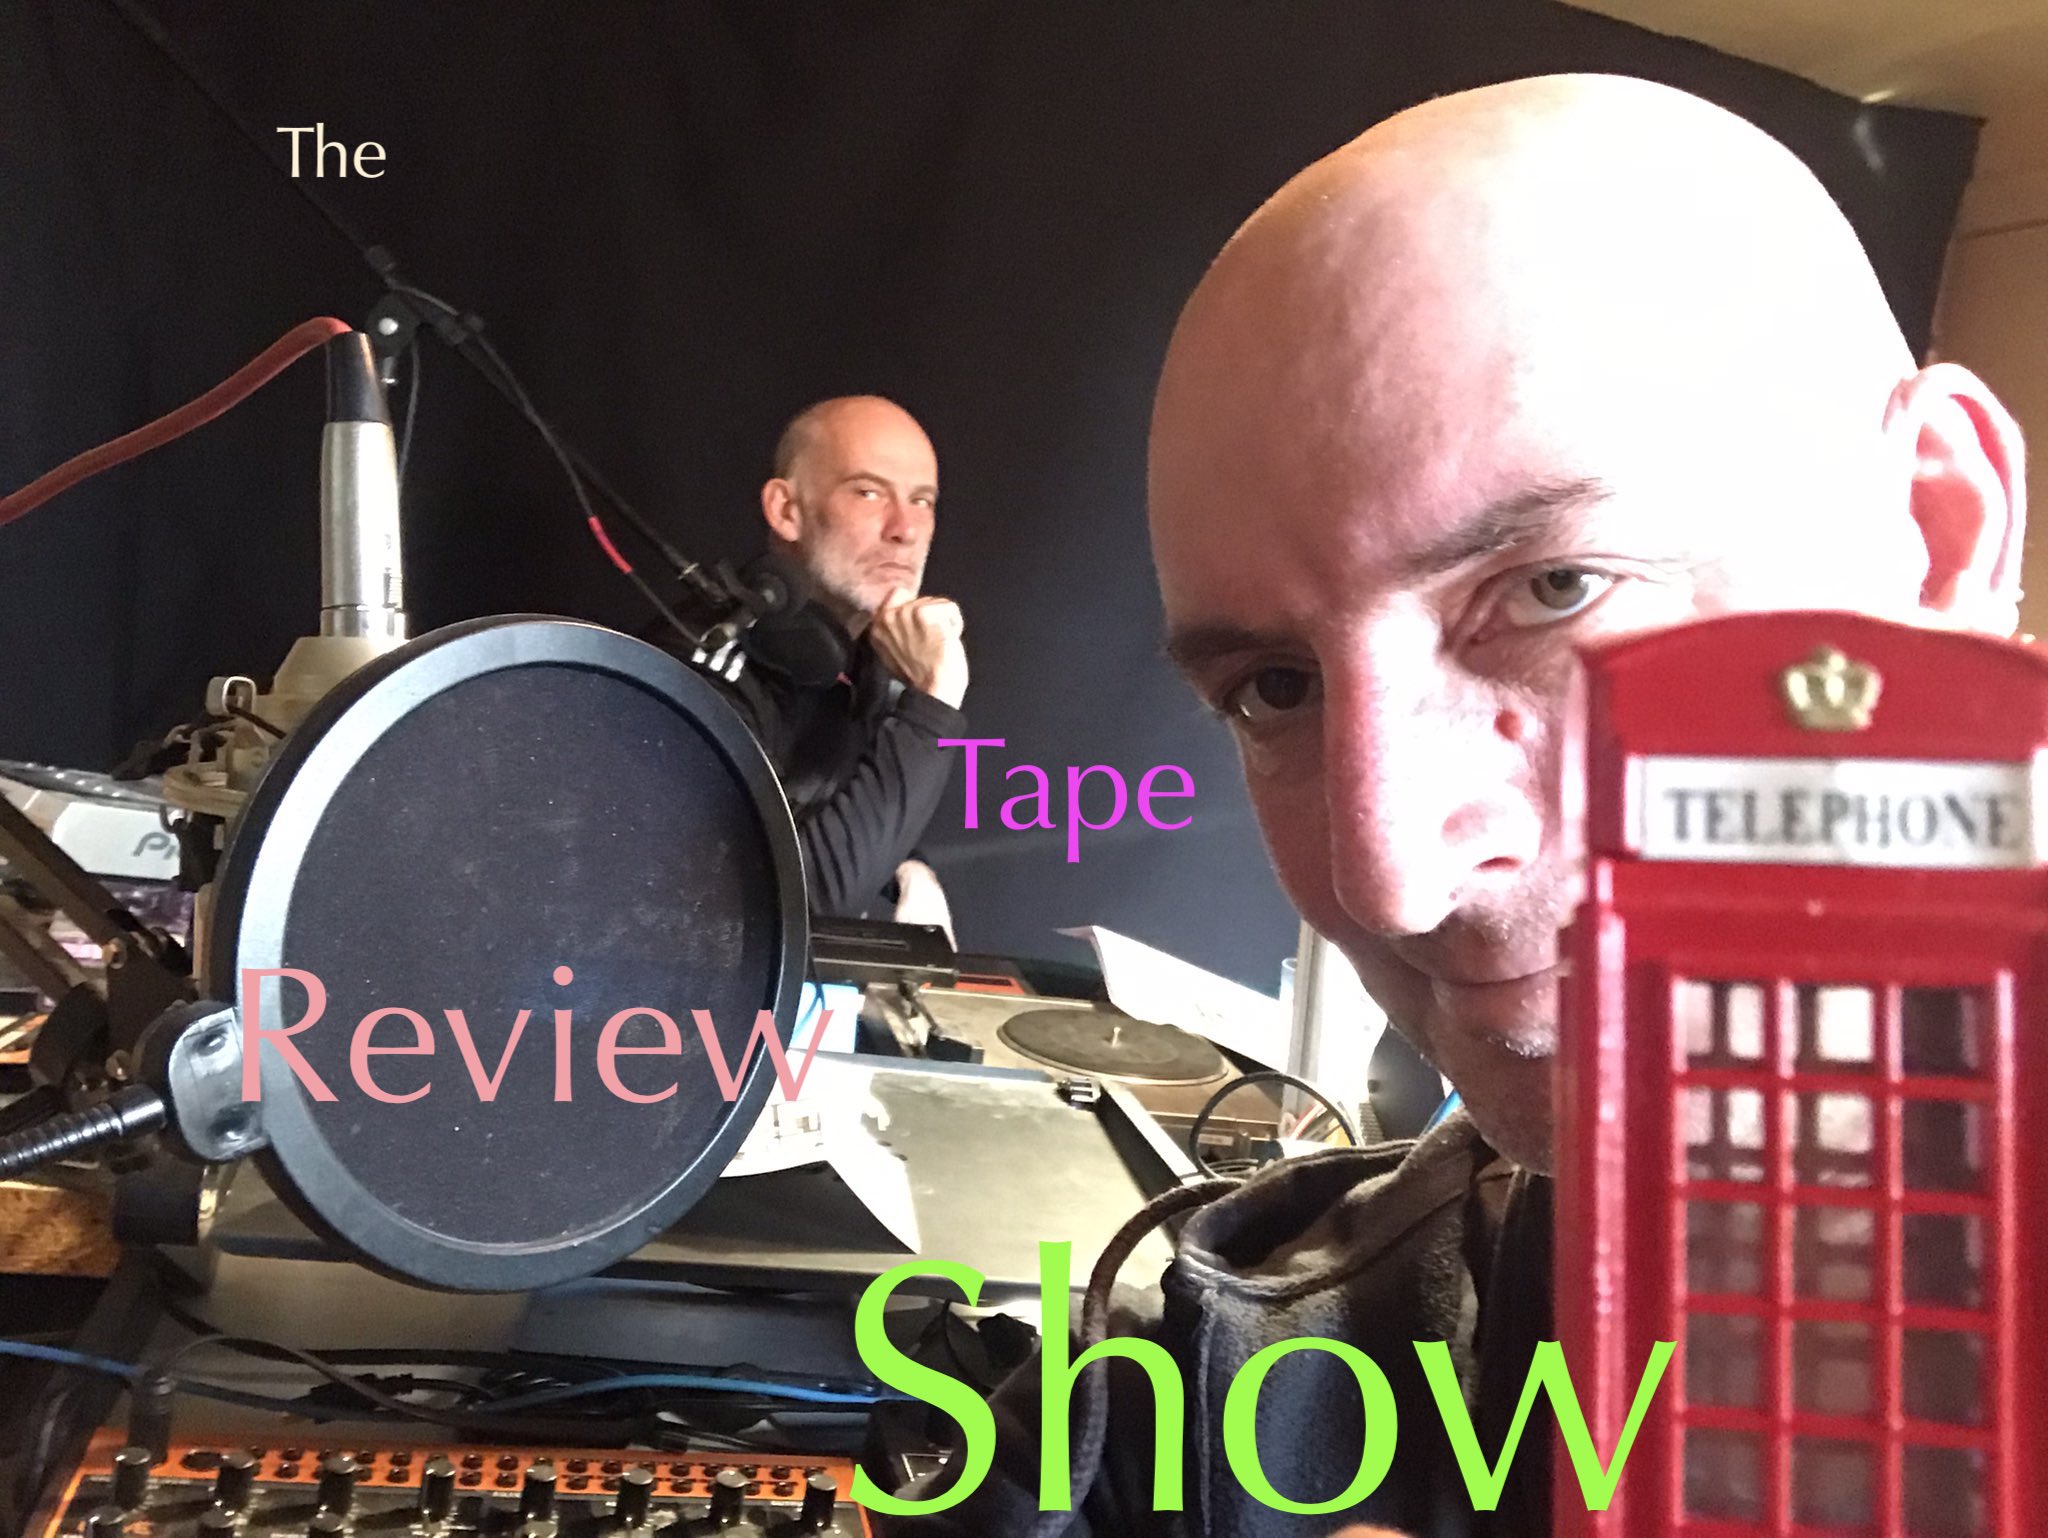 The Tape Review Show – The Joy of Isolation